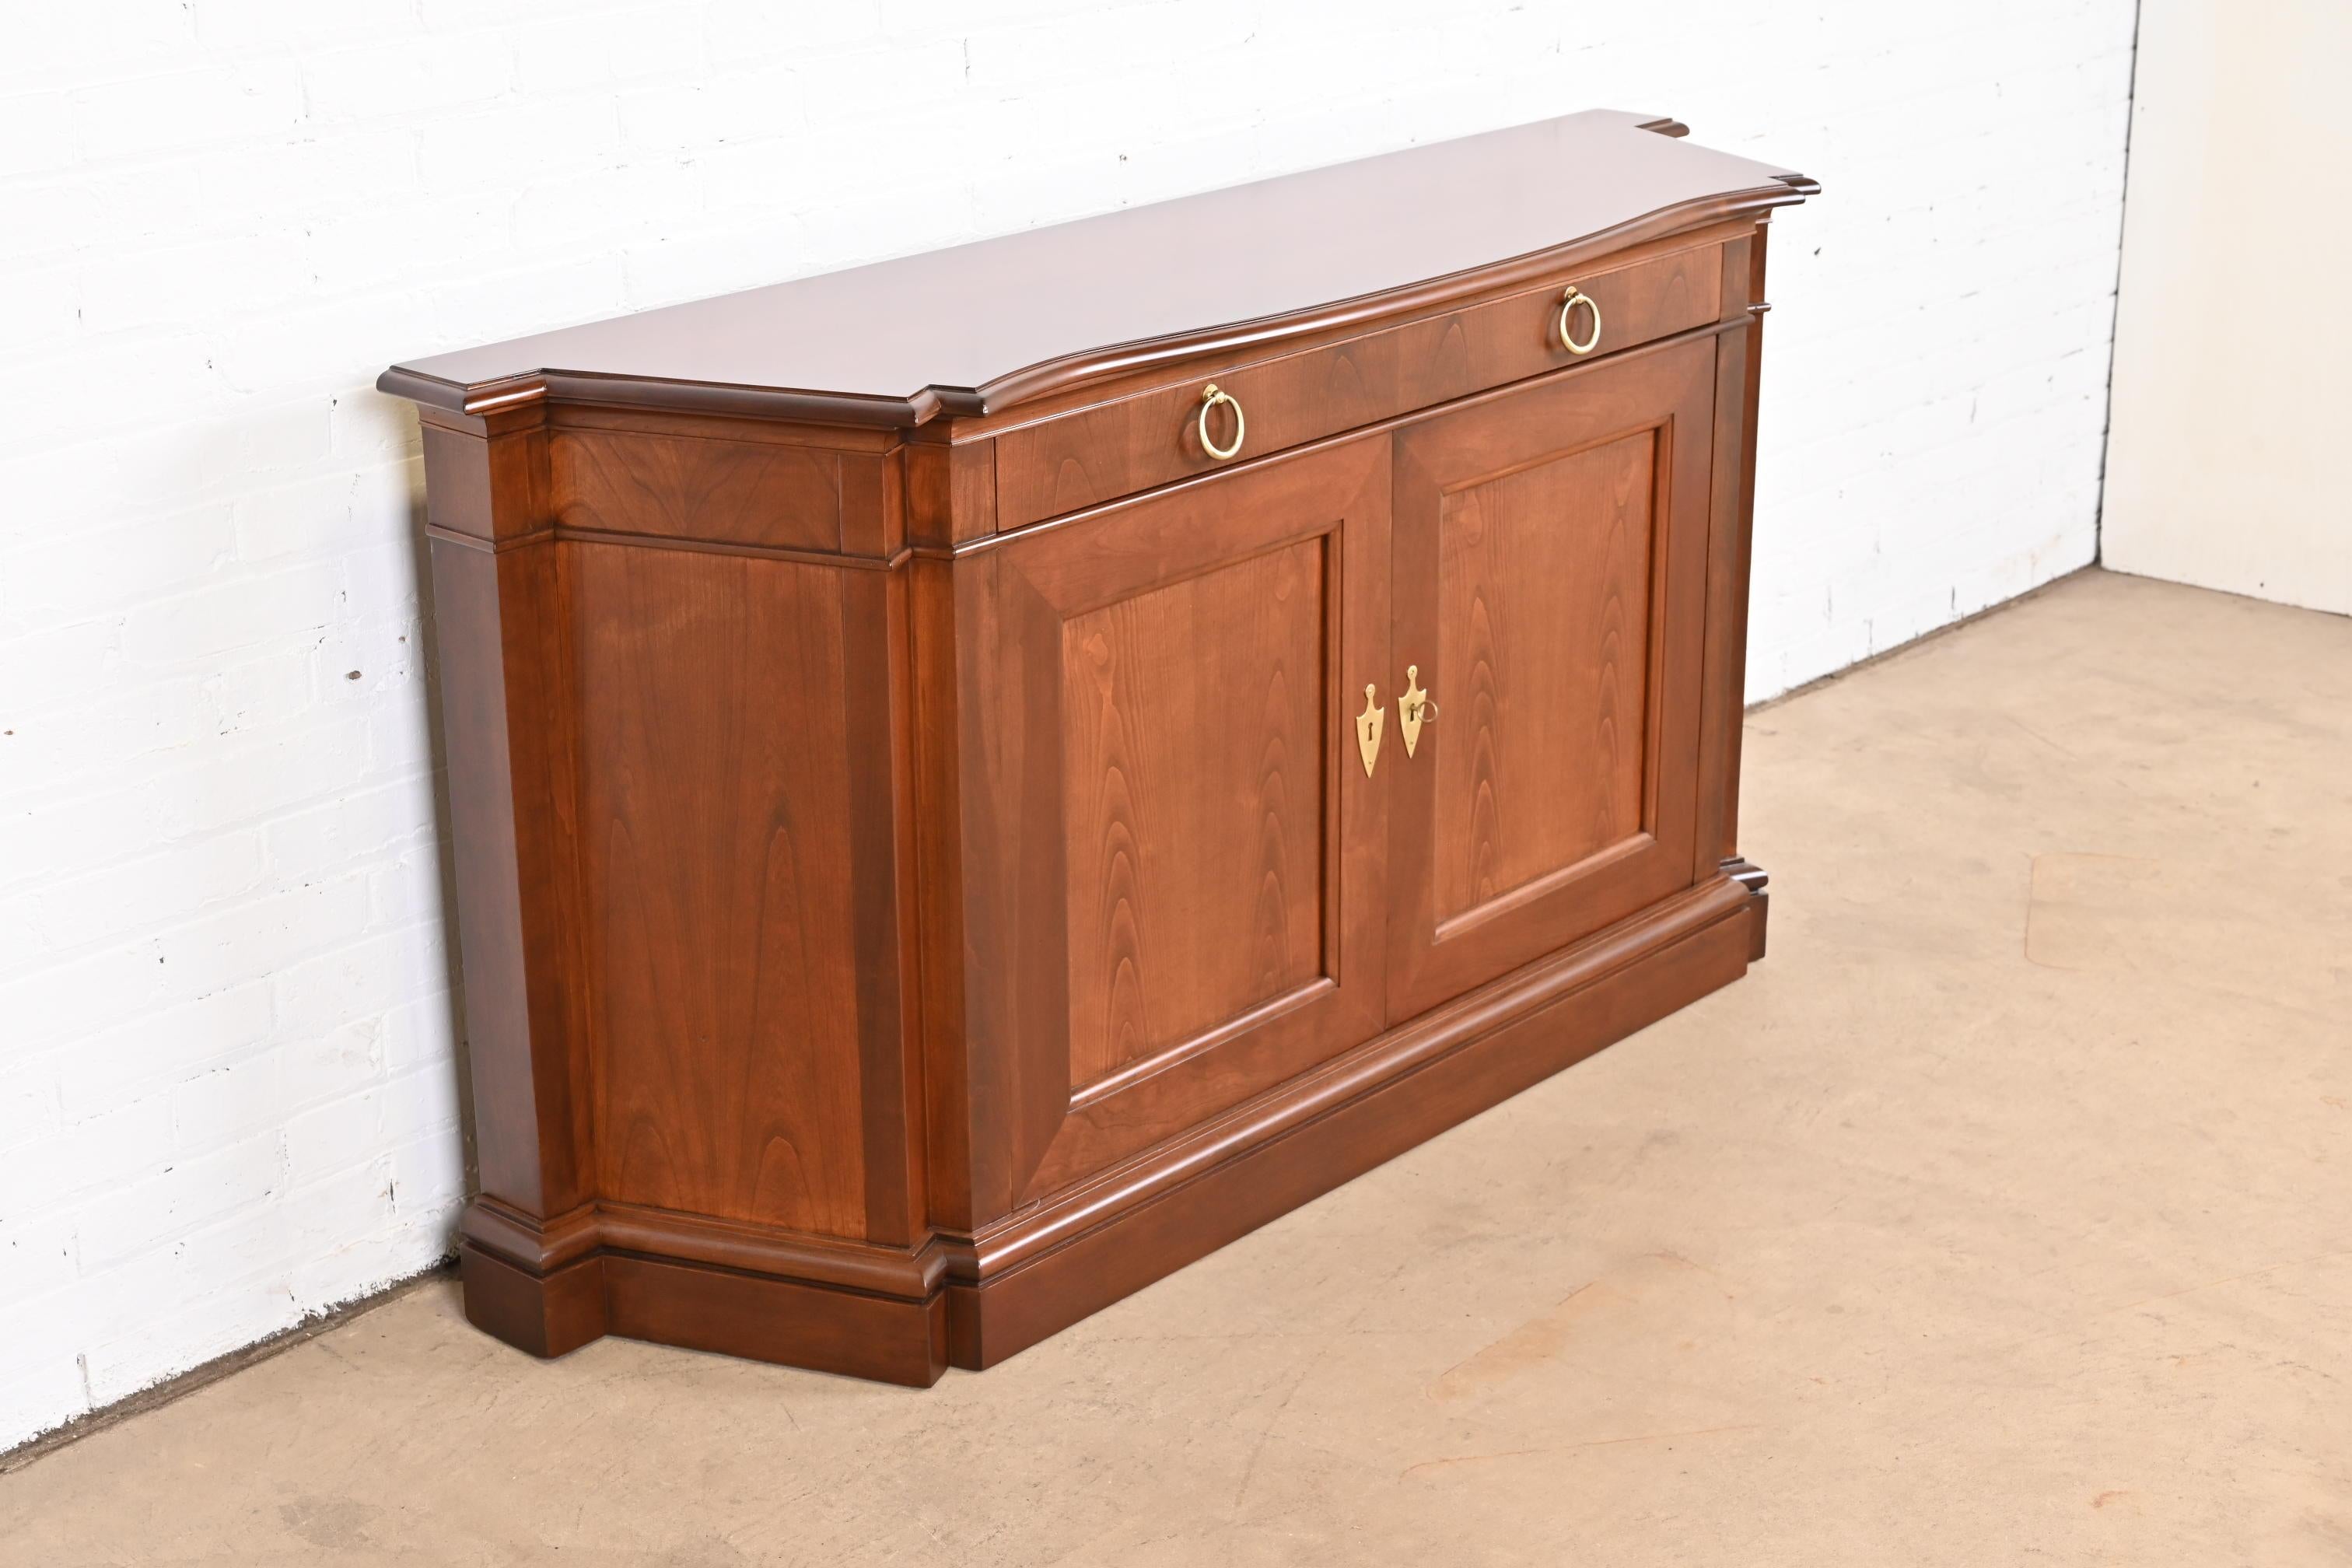 Mid-20th Century Baker Furniture French Regency Cherry Wood Sideboard or Bar Cabinet, Refinished